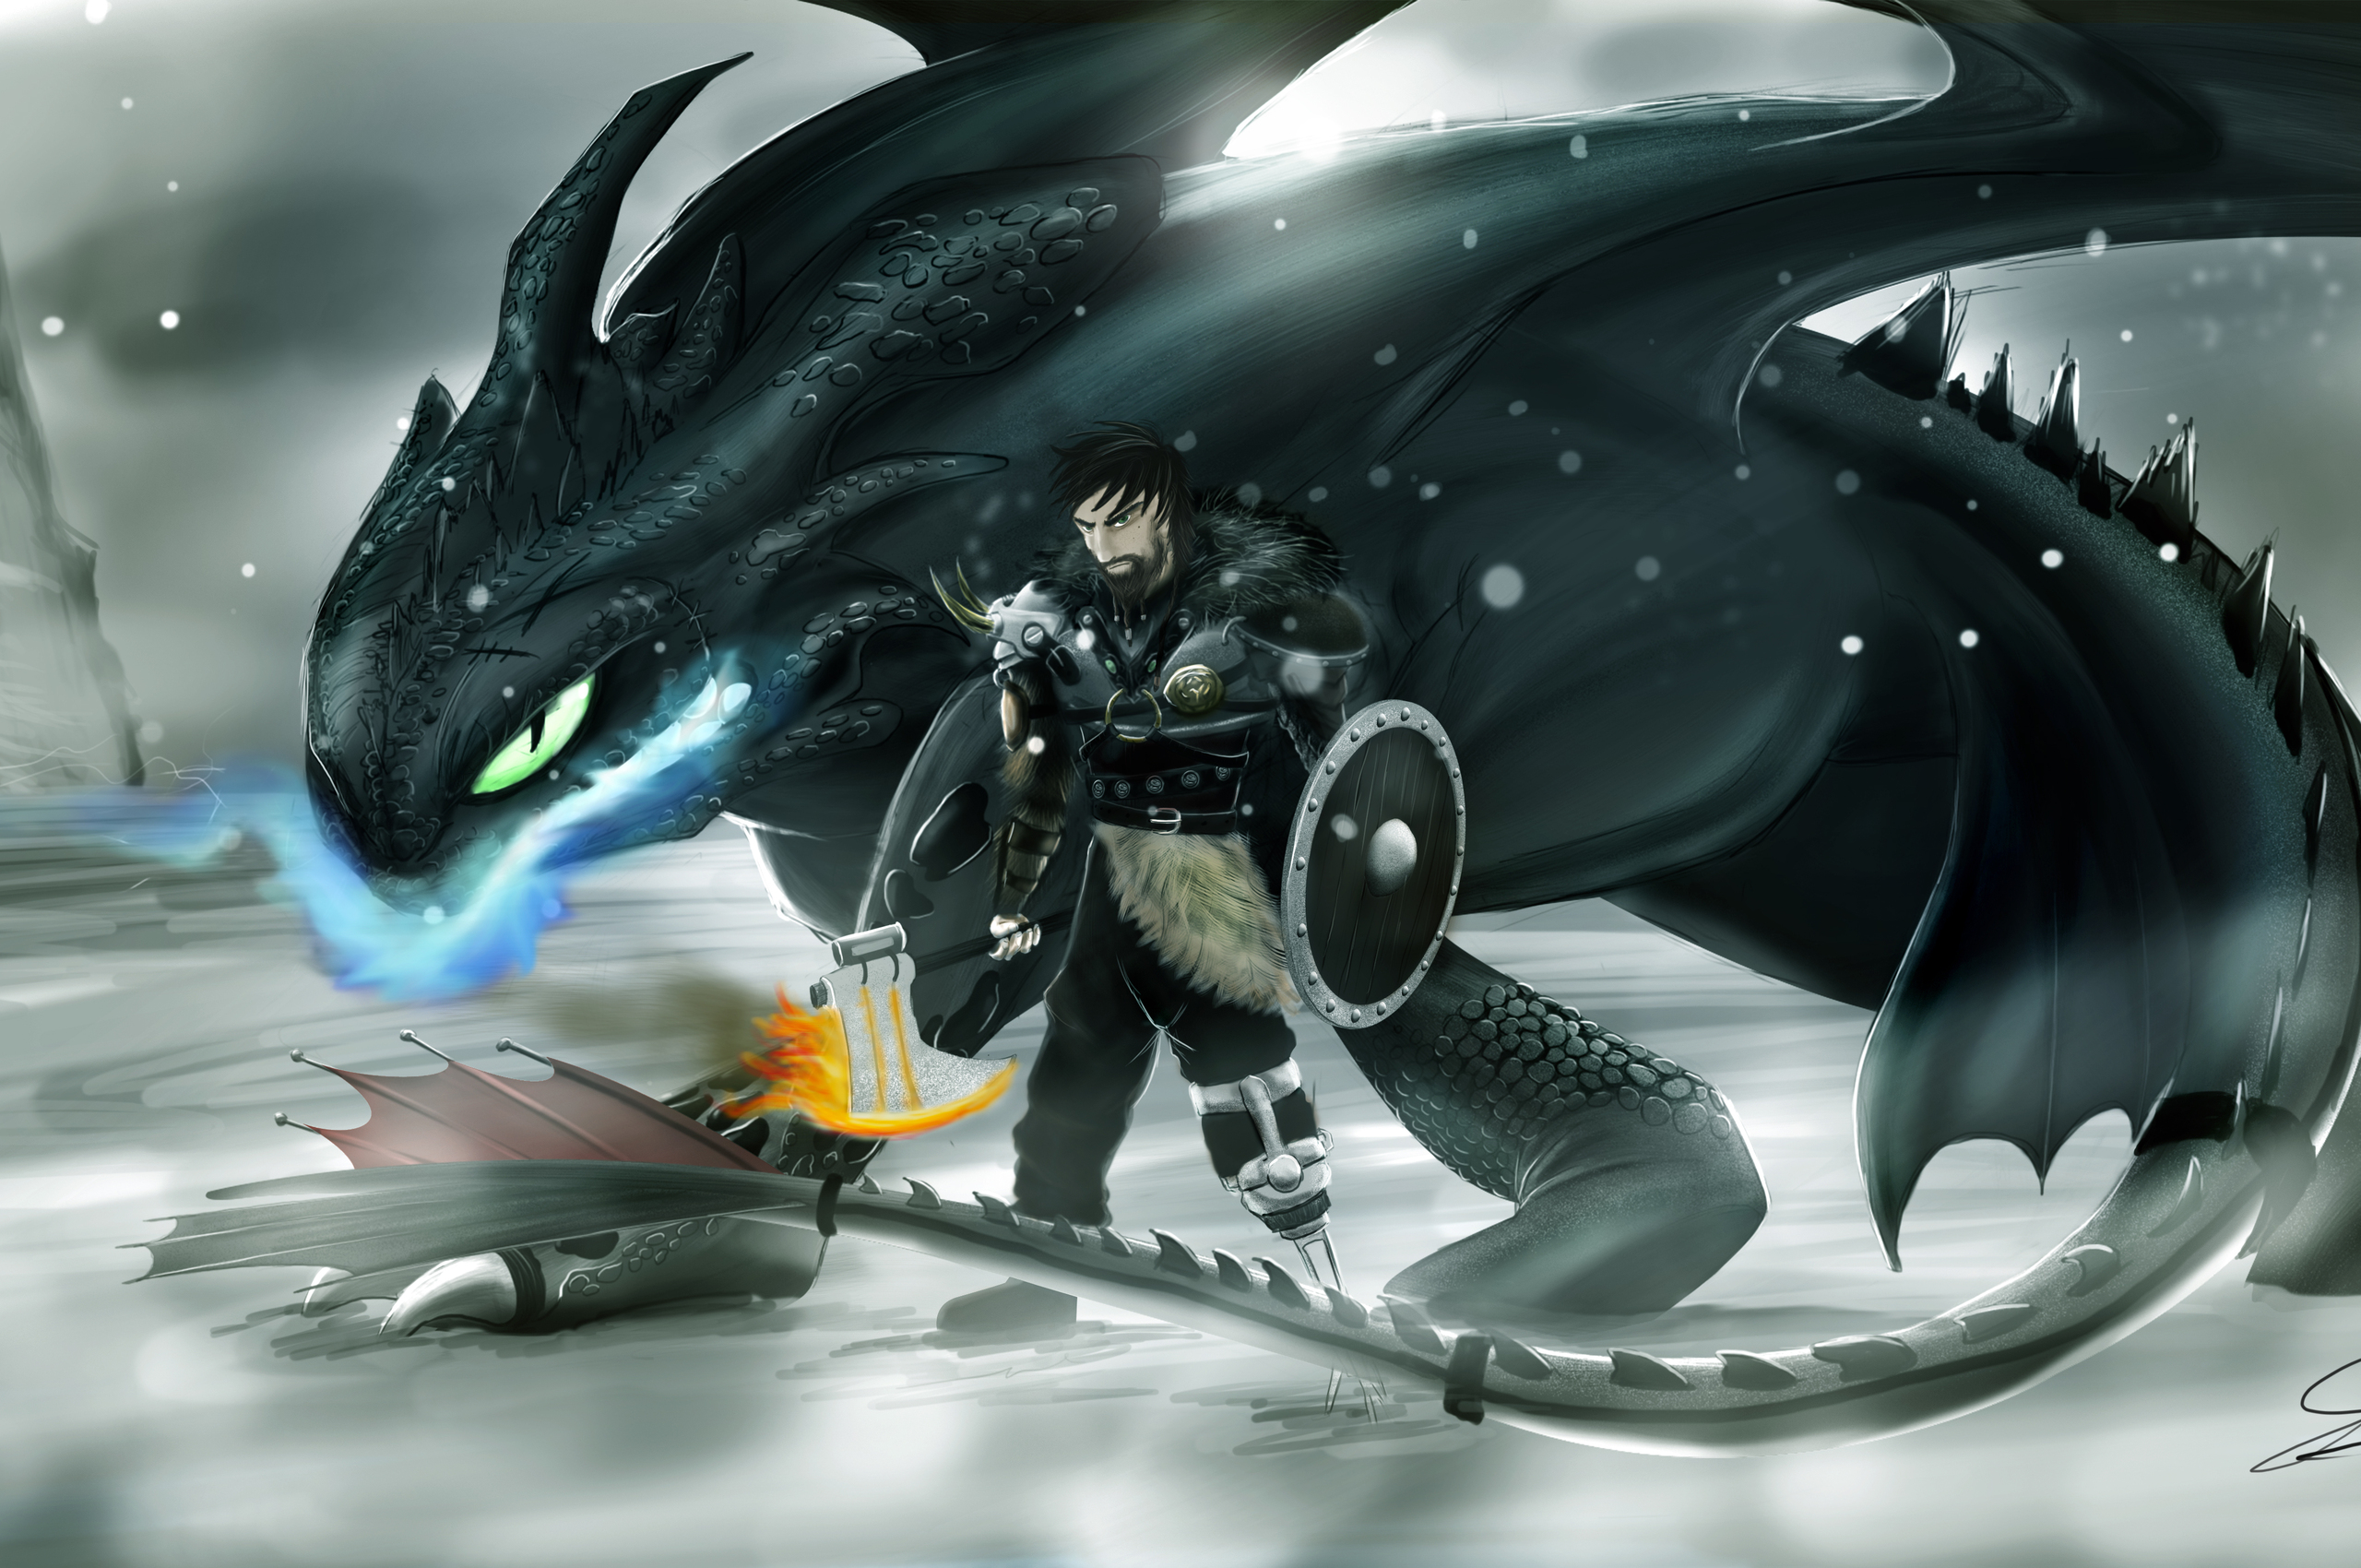 hiccup-how-to-train-your-dragon-3-5k-ii.jpg